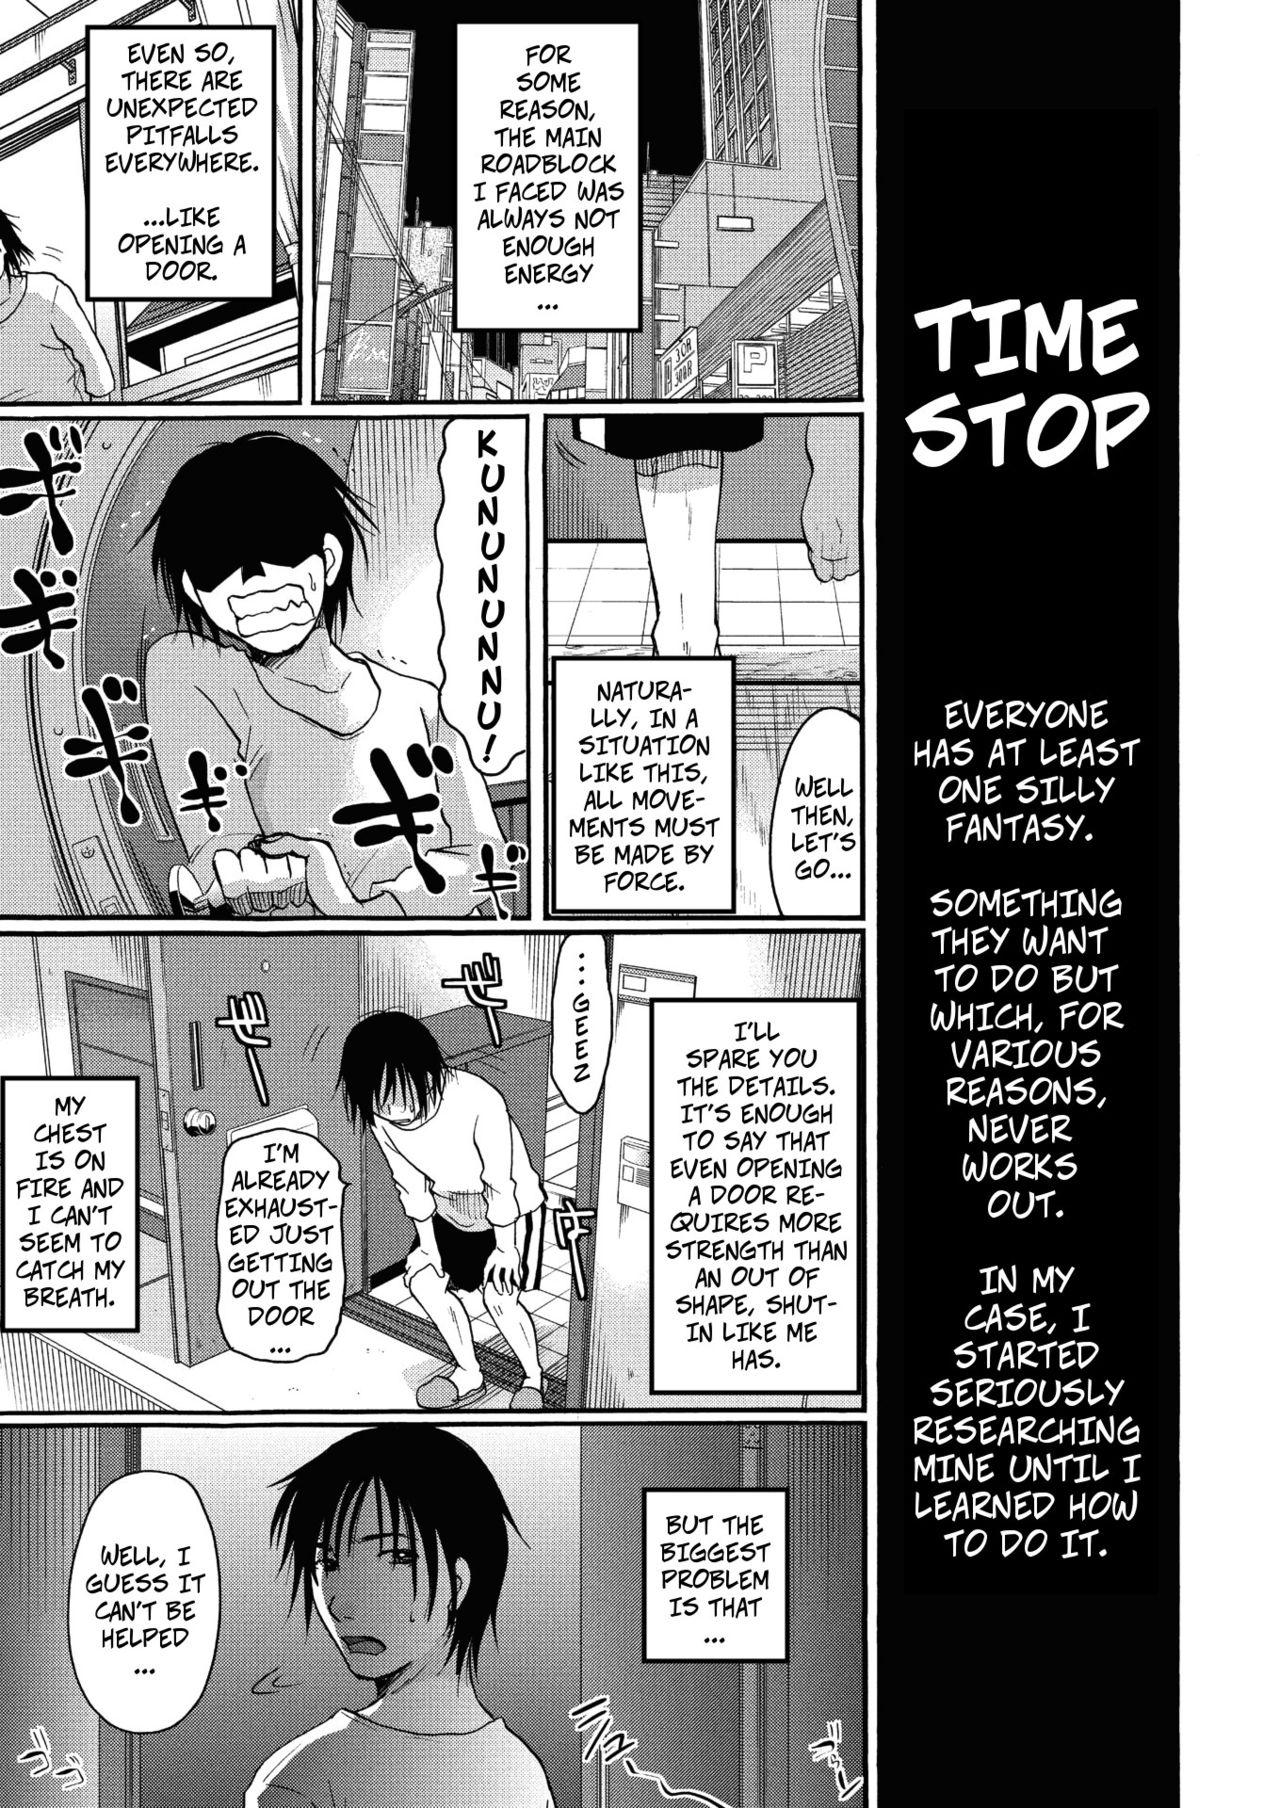 Adolescente How To Stop Time Masseuse - Page 3